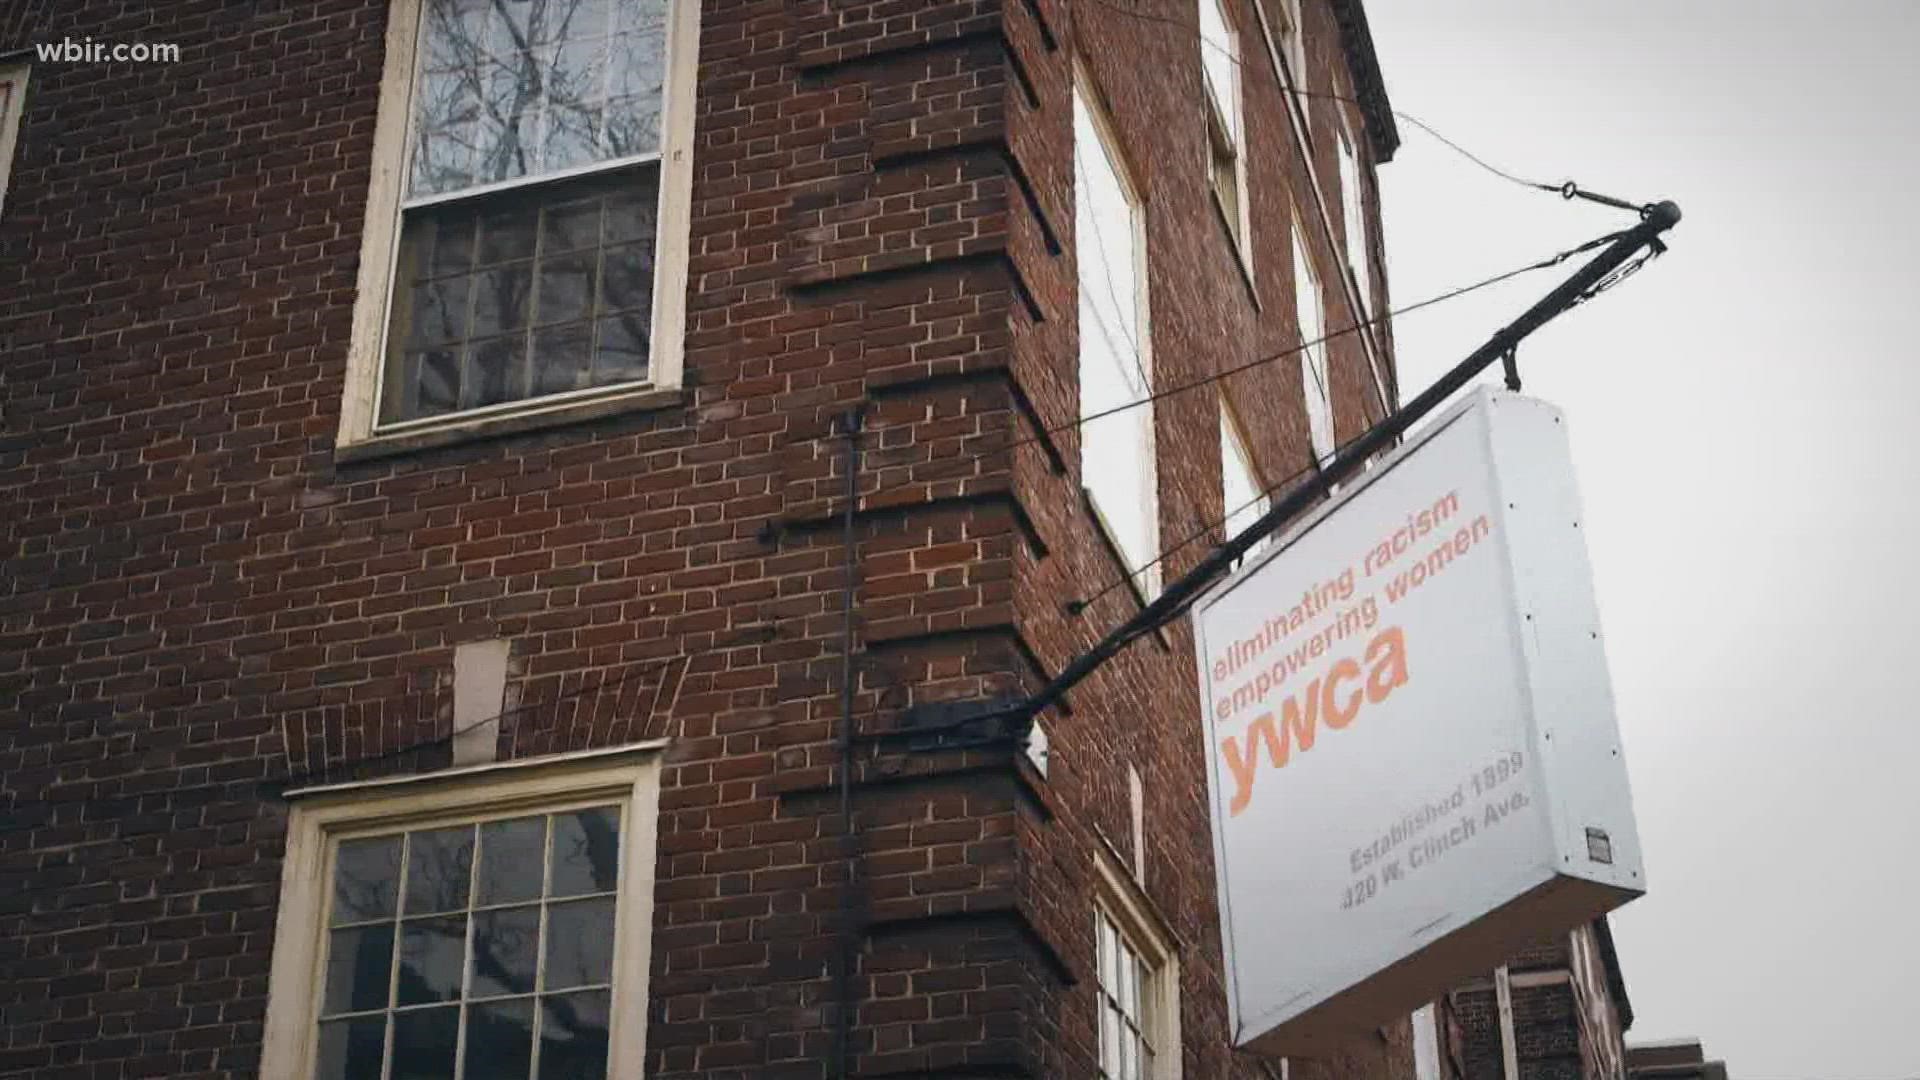 YWCA Knoxville offers resources for people from all cultures, helping victims get the services they need to heal.